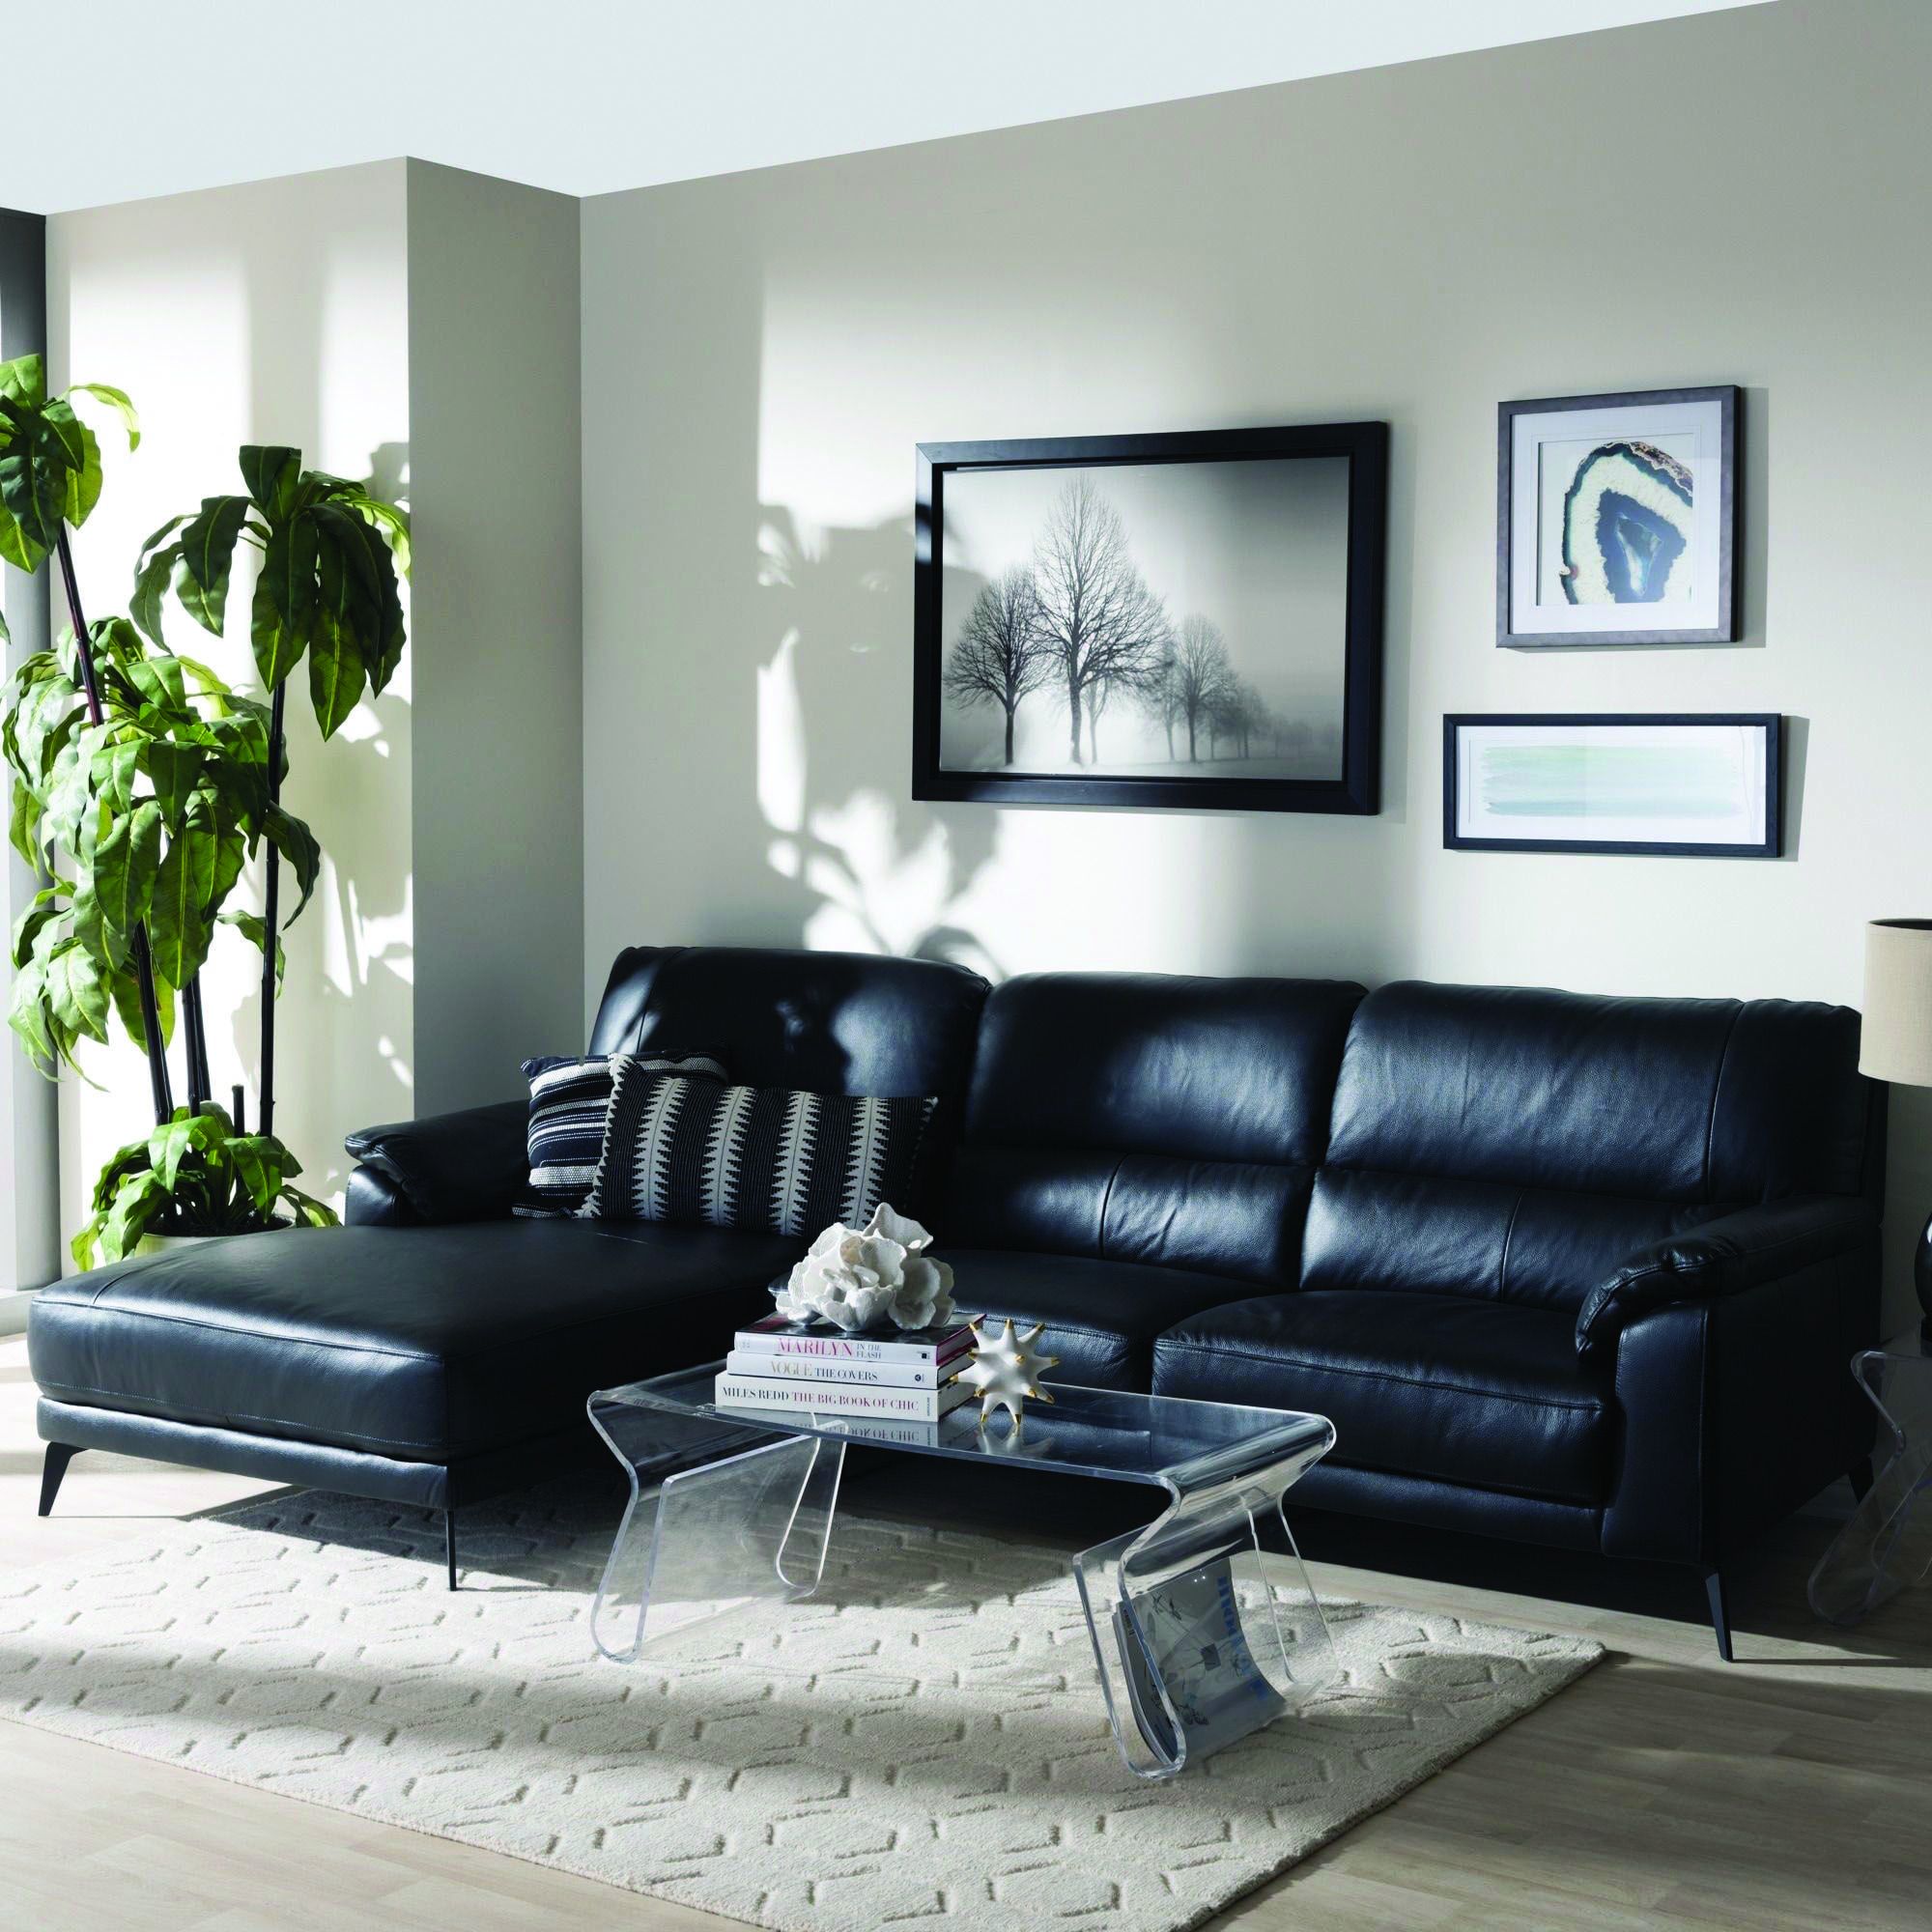 Cozy Black Living Room Goals For Your Home | Leather Couches Living In Sofas In Black (View 19 of 20)